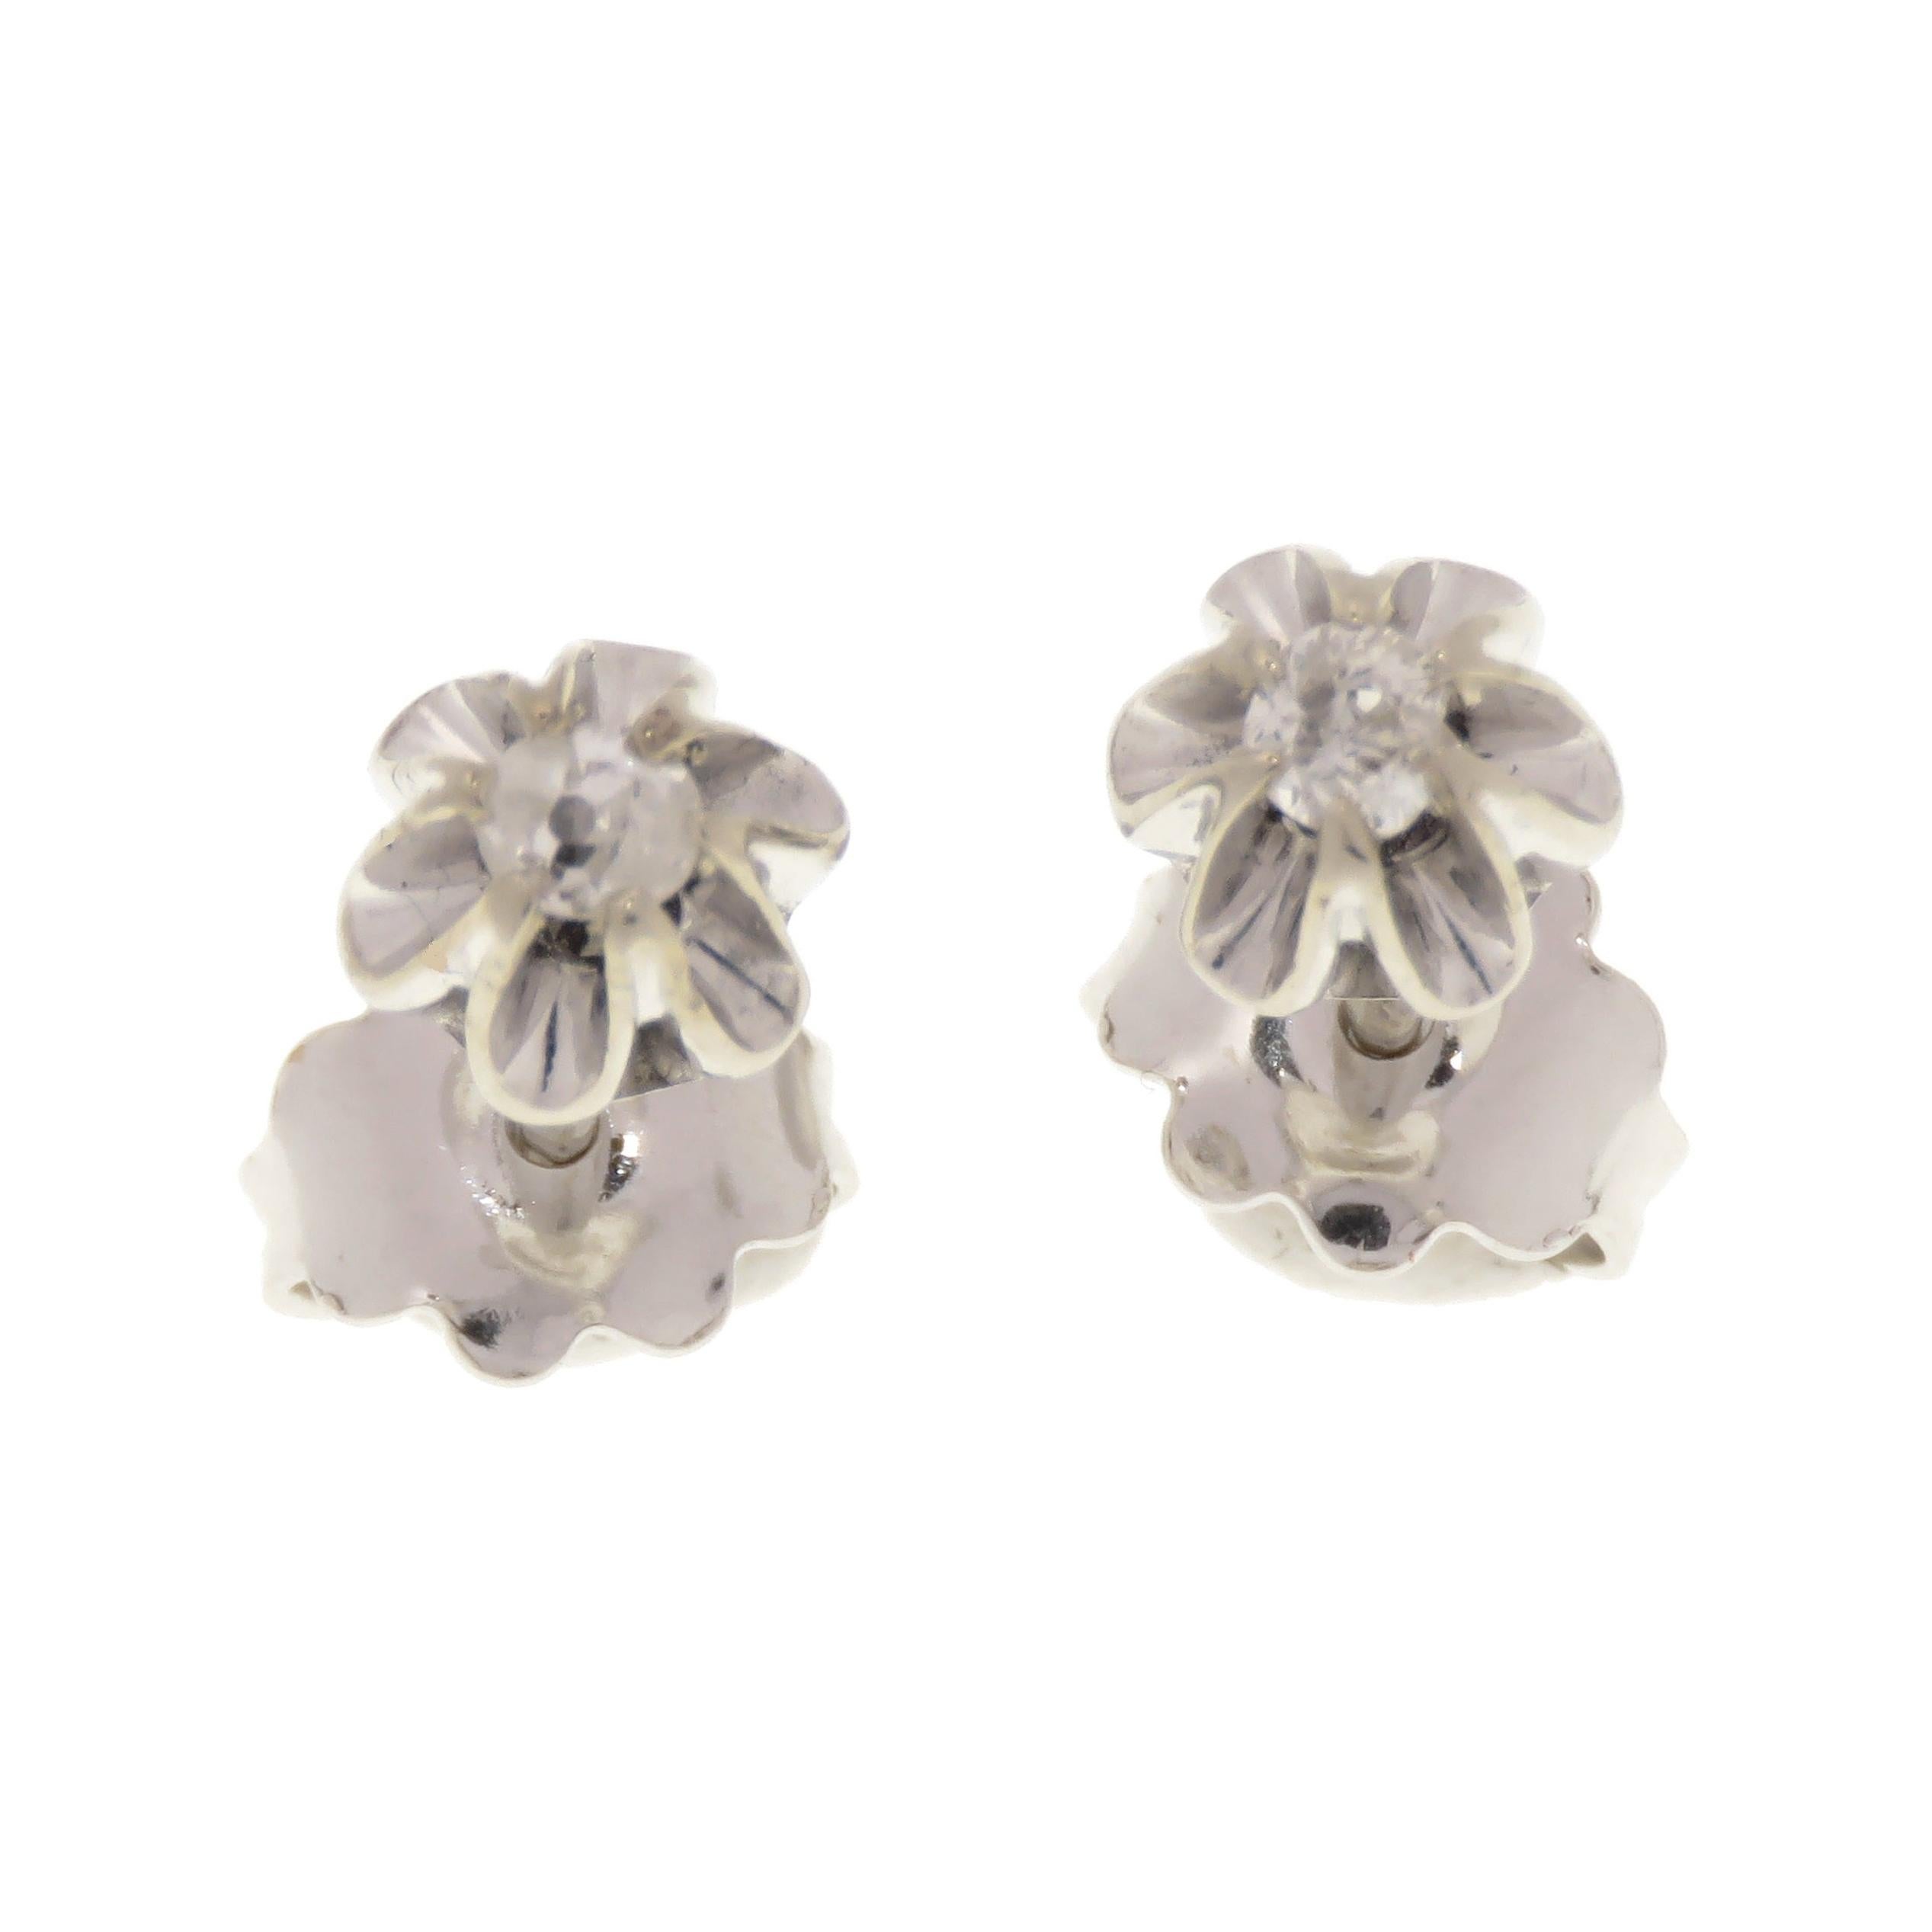 White Diamonds 18 Karat White Gold Vintage Stud Earrings Handcrafted in Italy For Sale